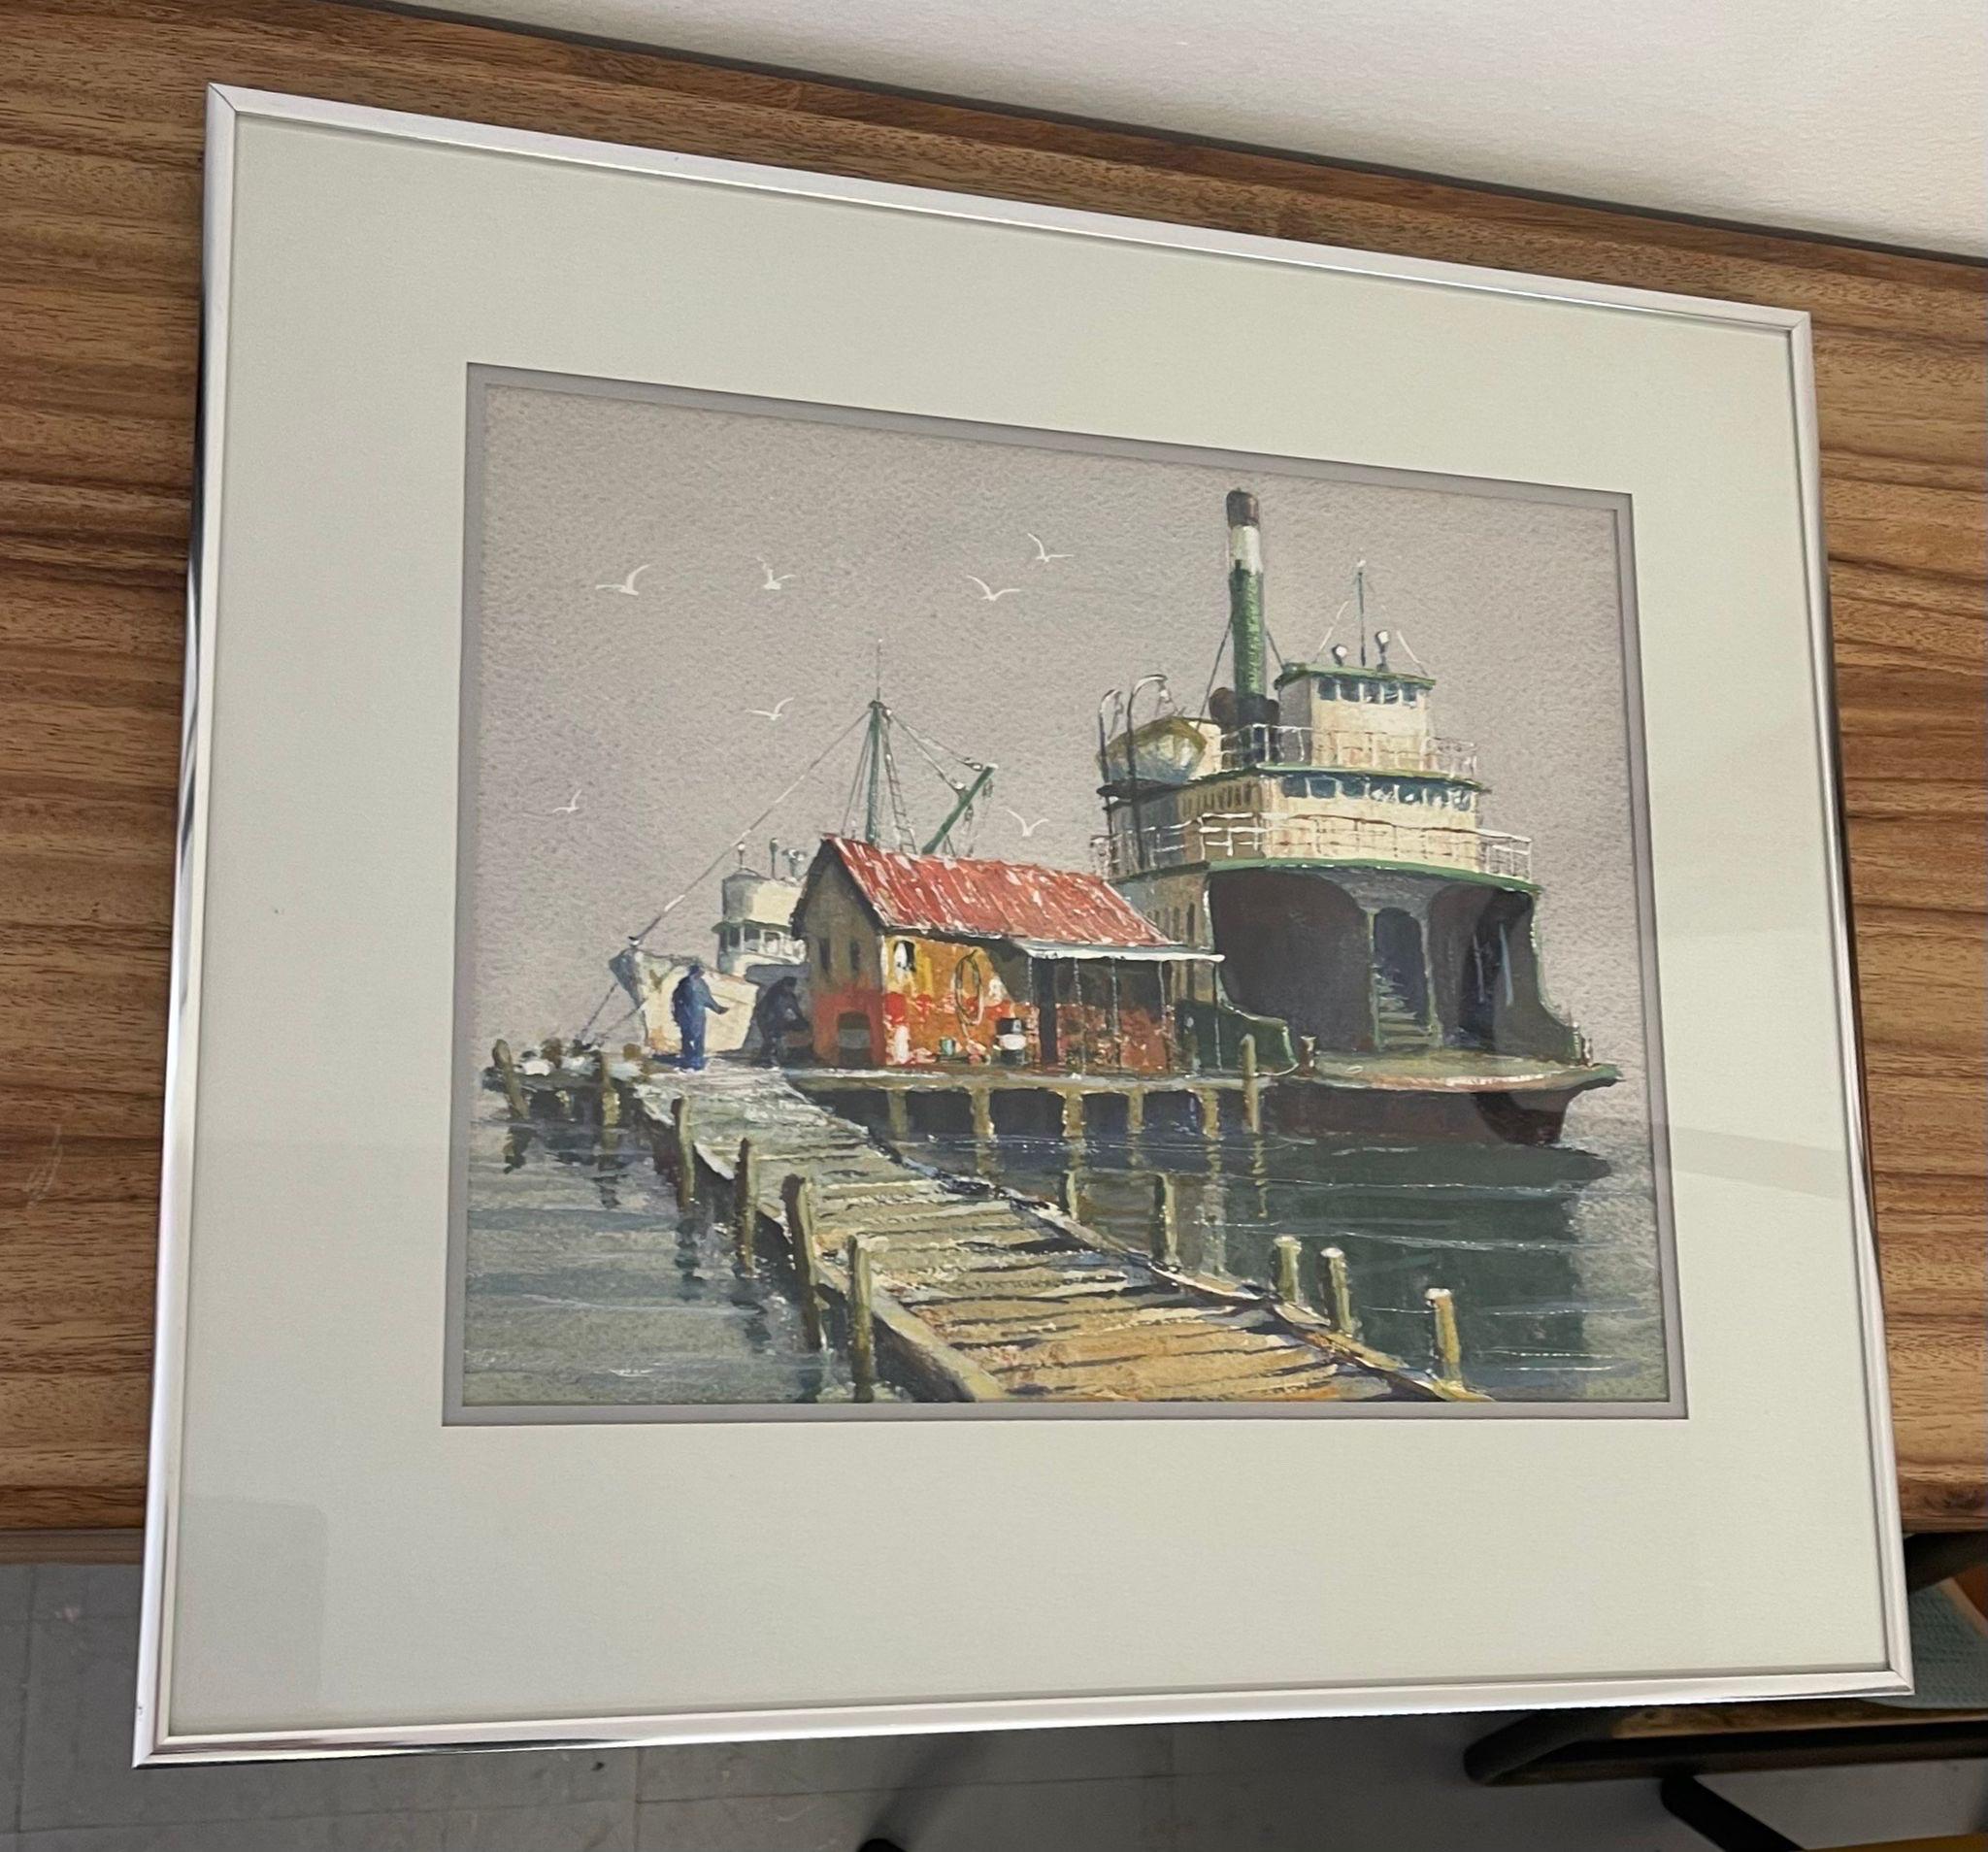 Professionally framed and matted scenic watercolor of boat house and ferry. Silver toned frame. More information about the Painting shown on the back. Vintage Condition Consistent with Age as Pictured.

Dimensions. 18 W ; 1/4 D ; 16 H